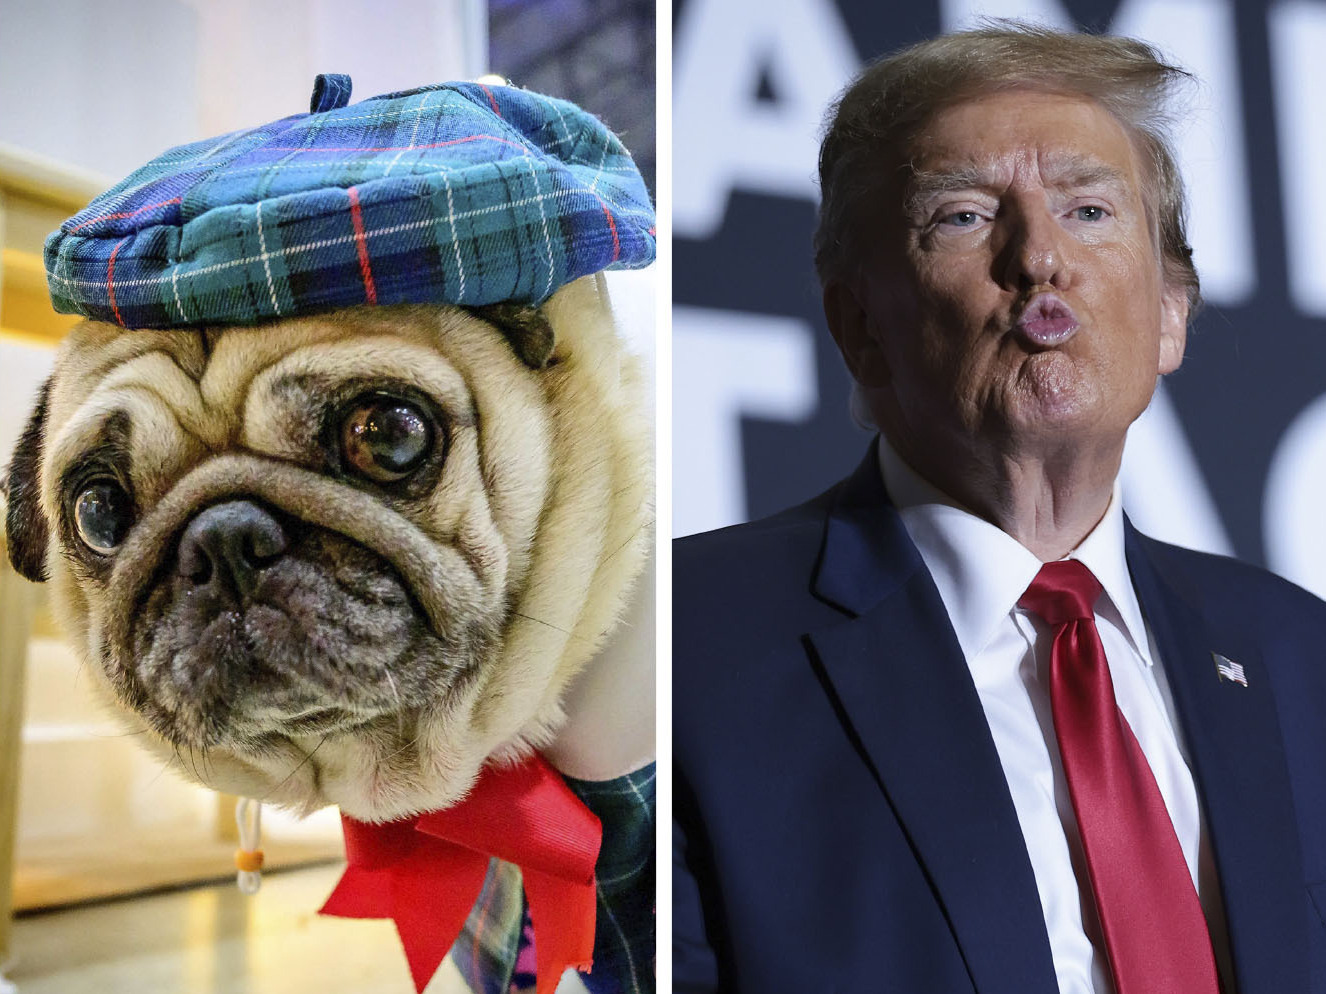 A comedian, a pug and a politician walk into the quiz. Do you know the punchline?